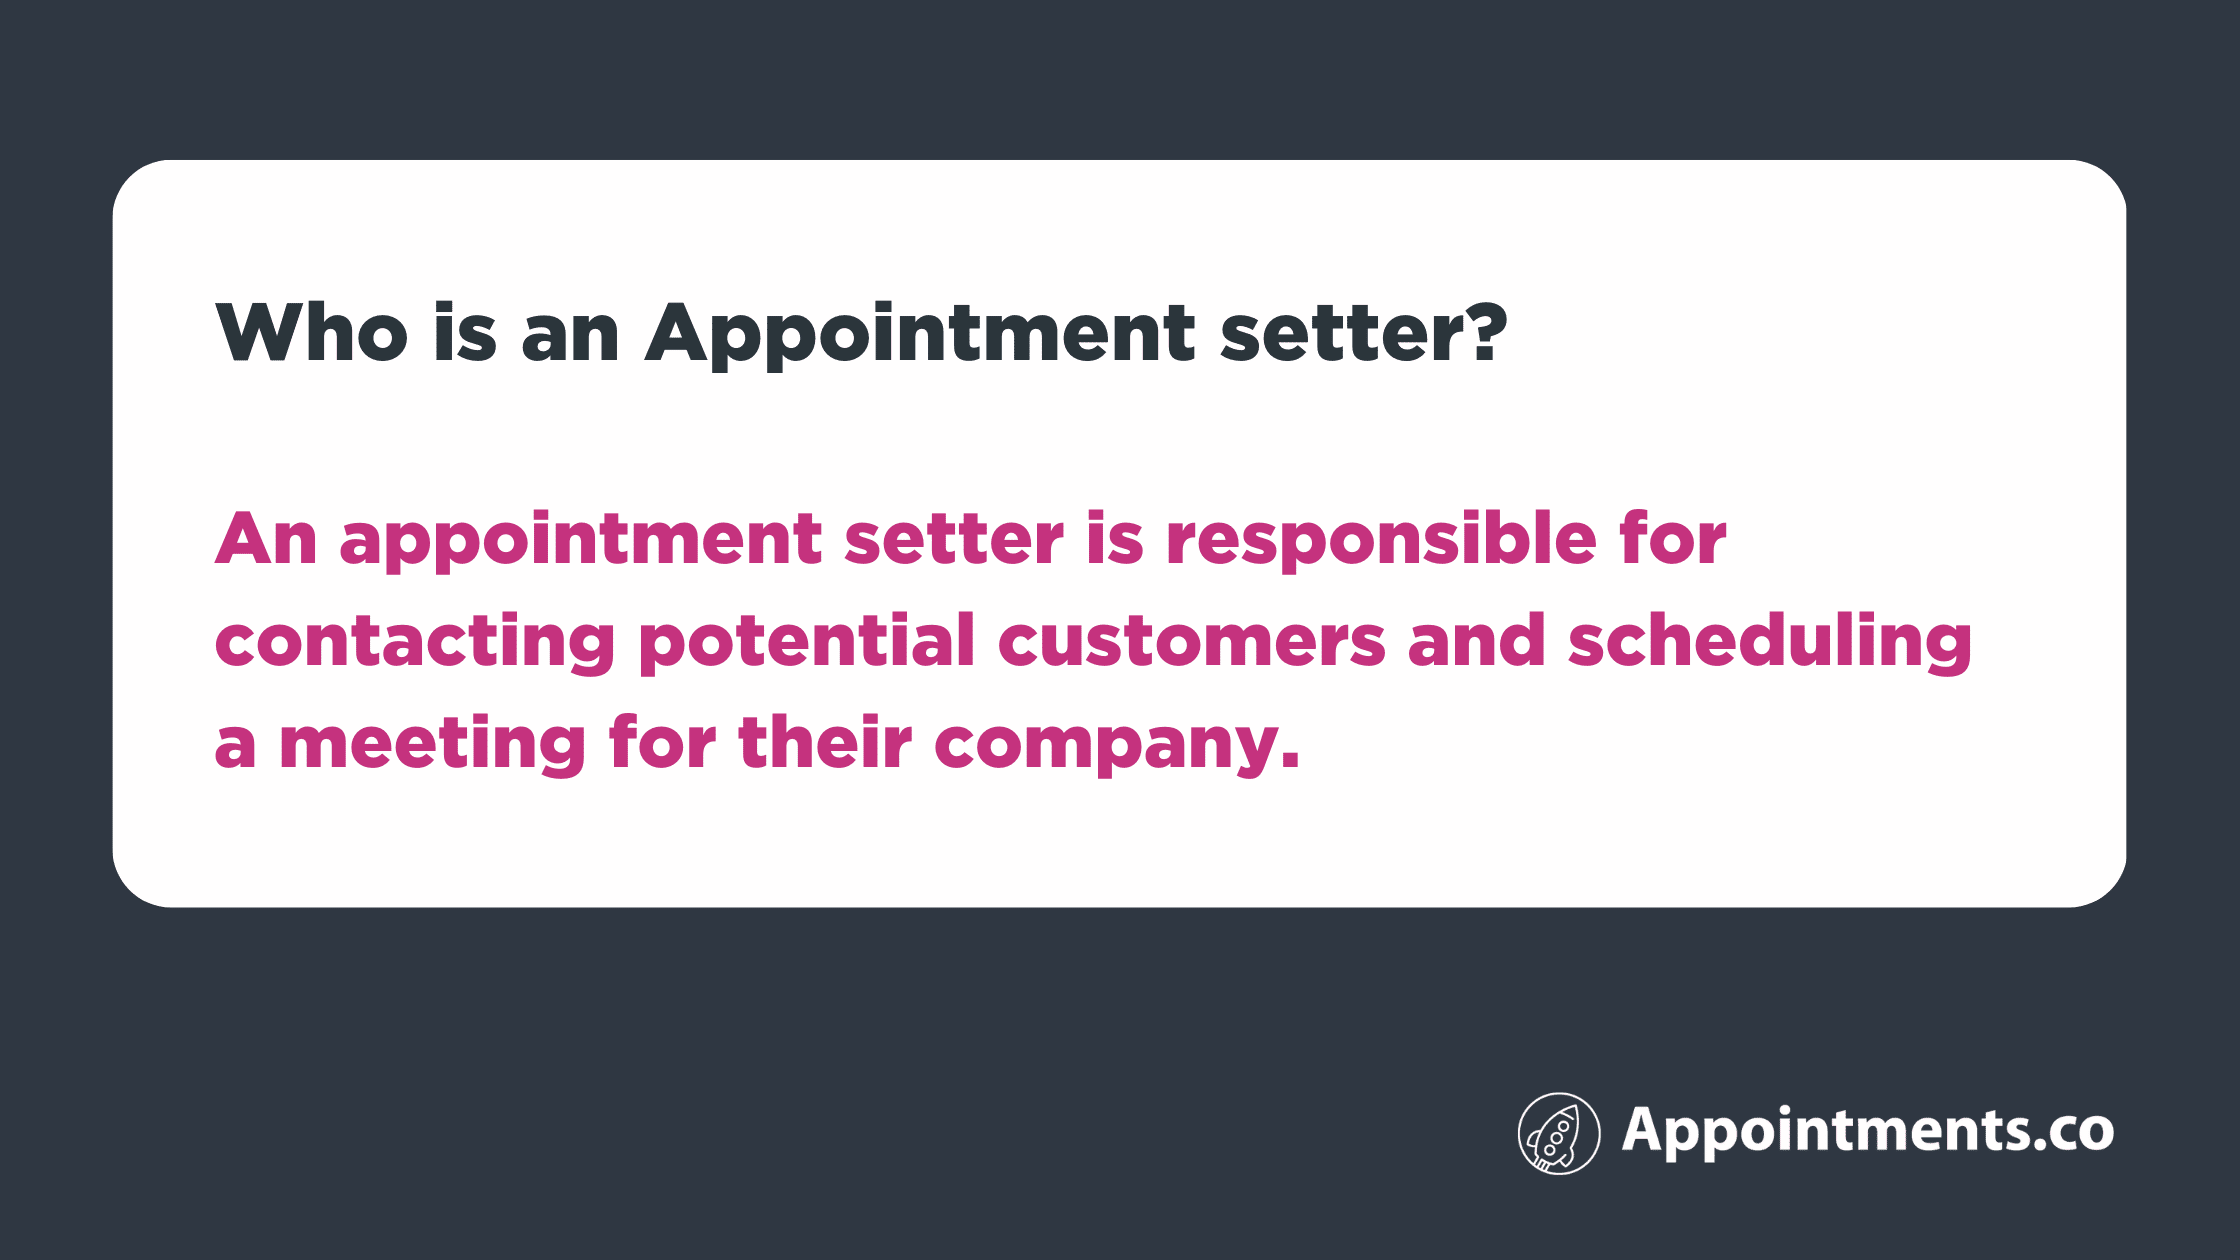 Who is an appointment setter